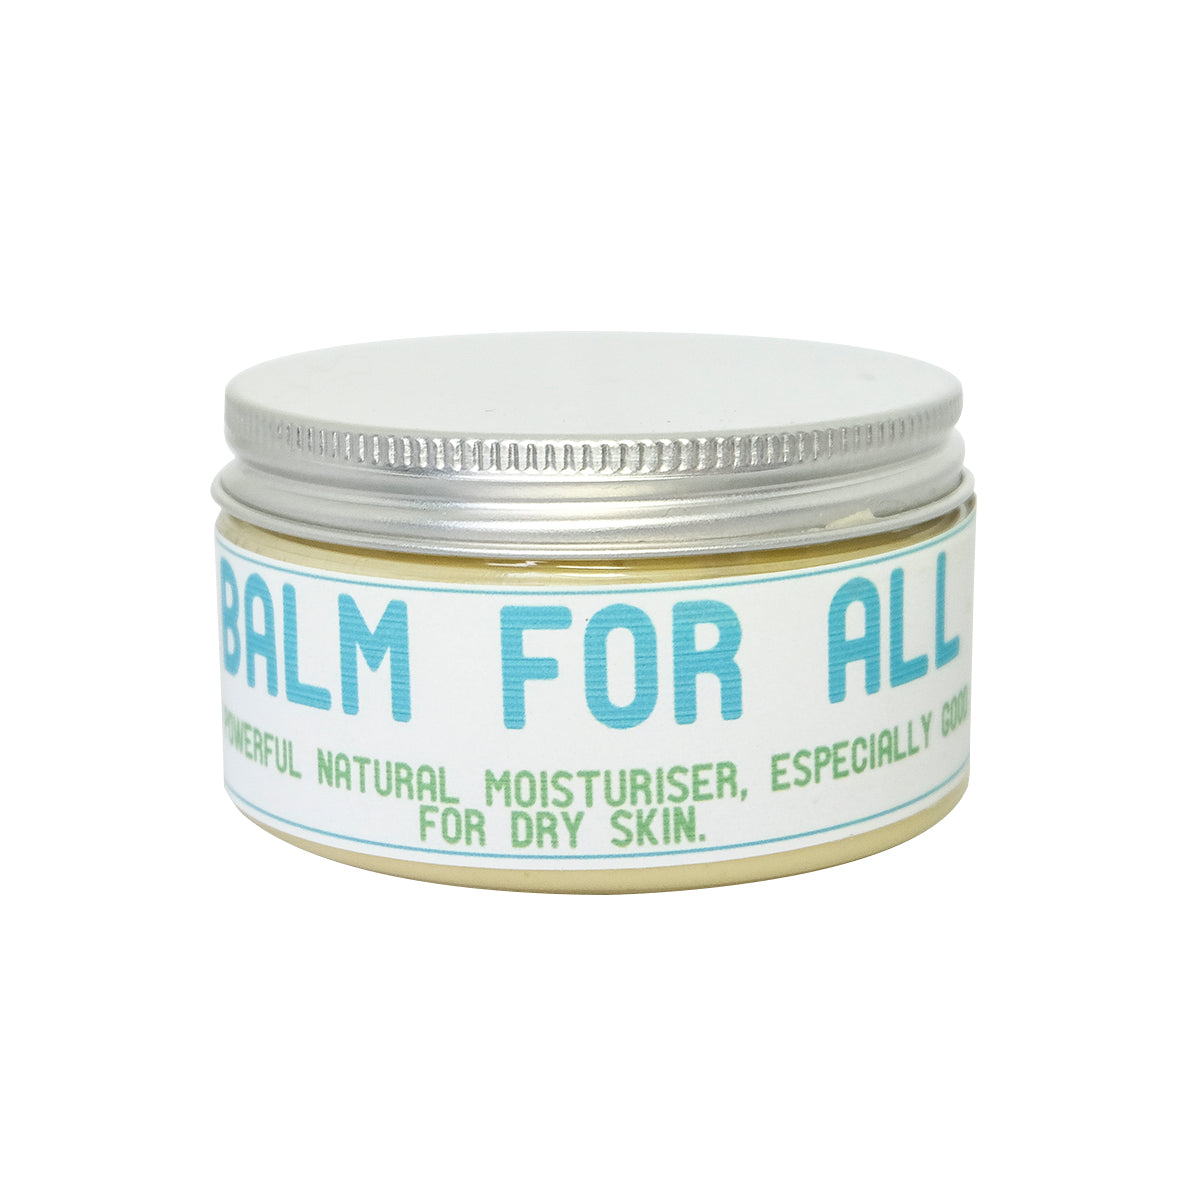 Balm for All No 1 - Unscented